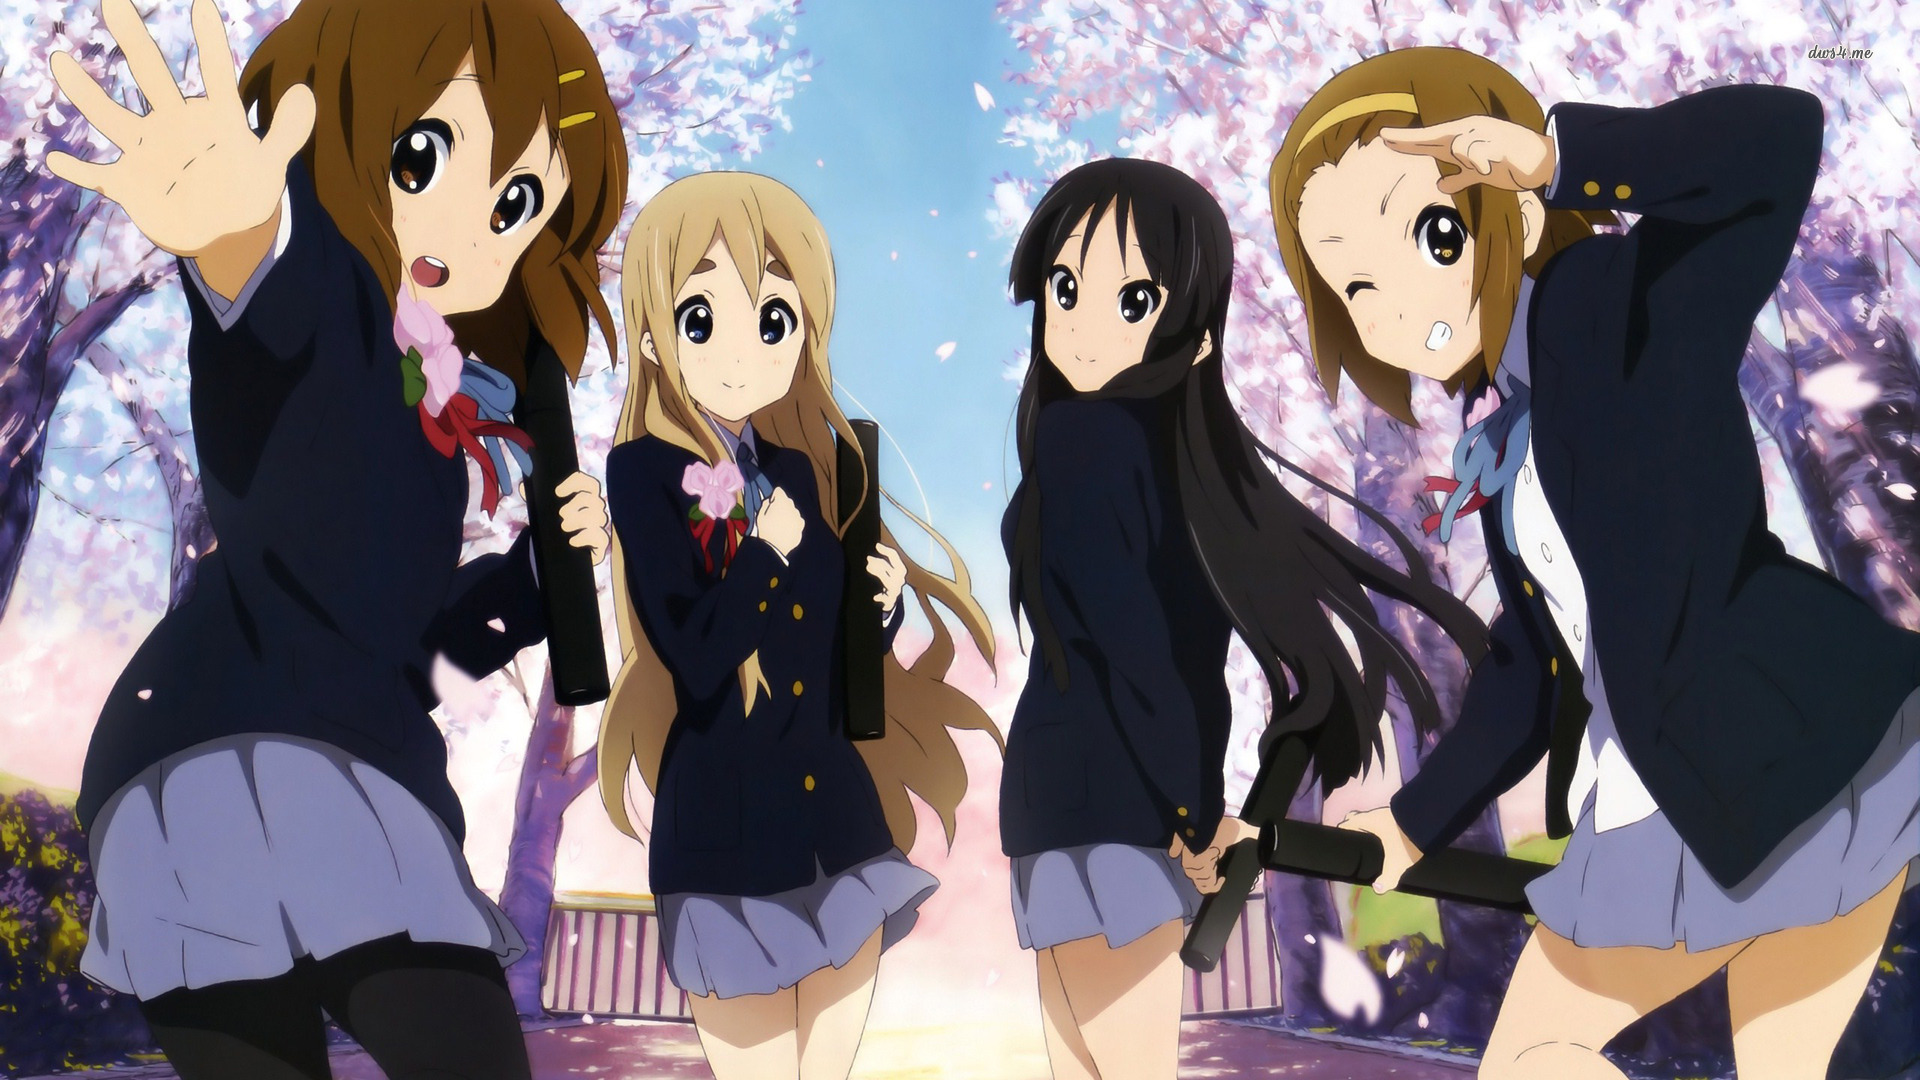 K-ON! Backgrounds, Compatible - PC, Mobile, Gadgets| 1920x1080 px